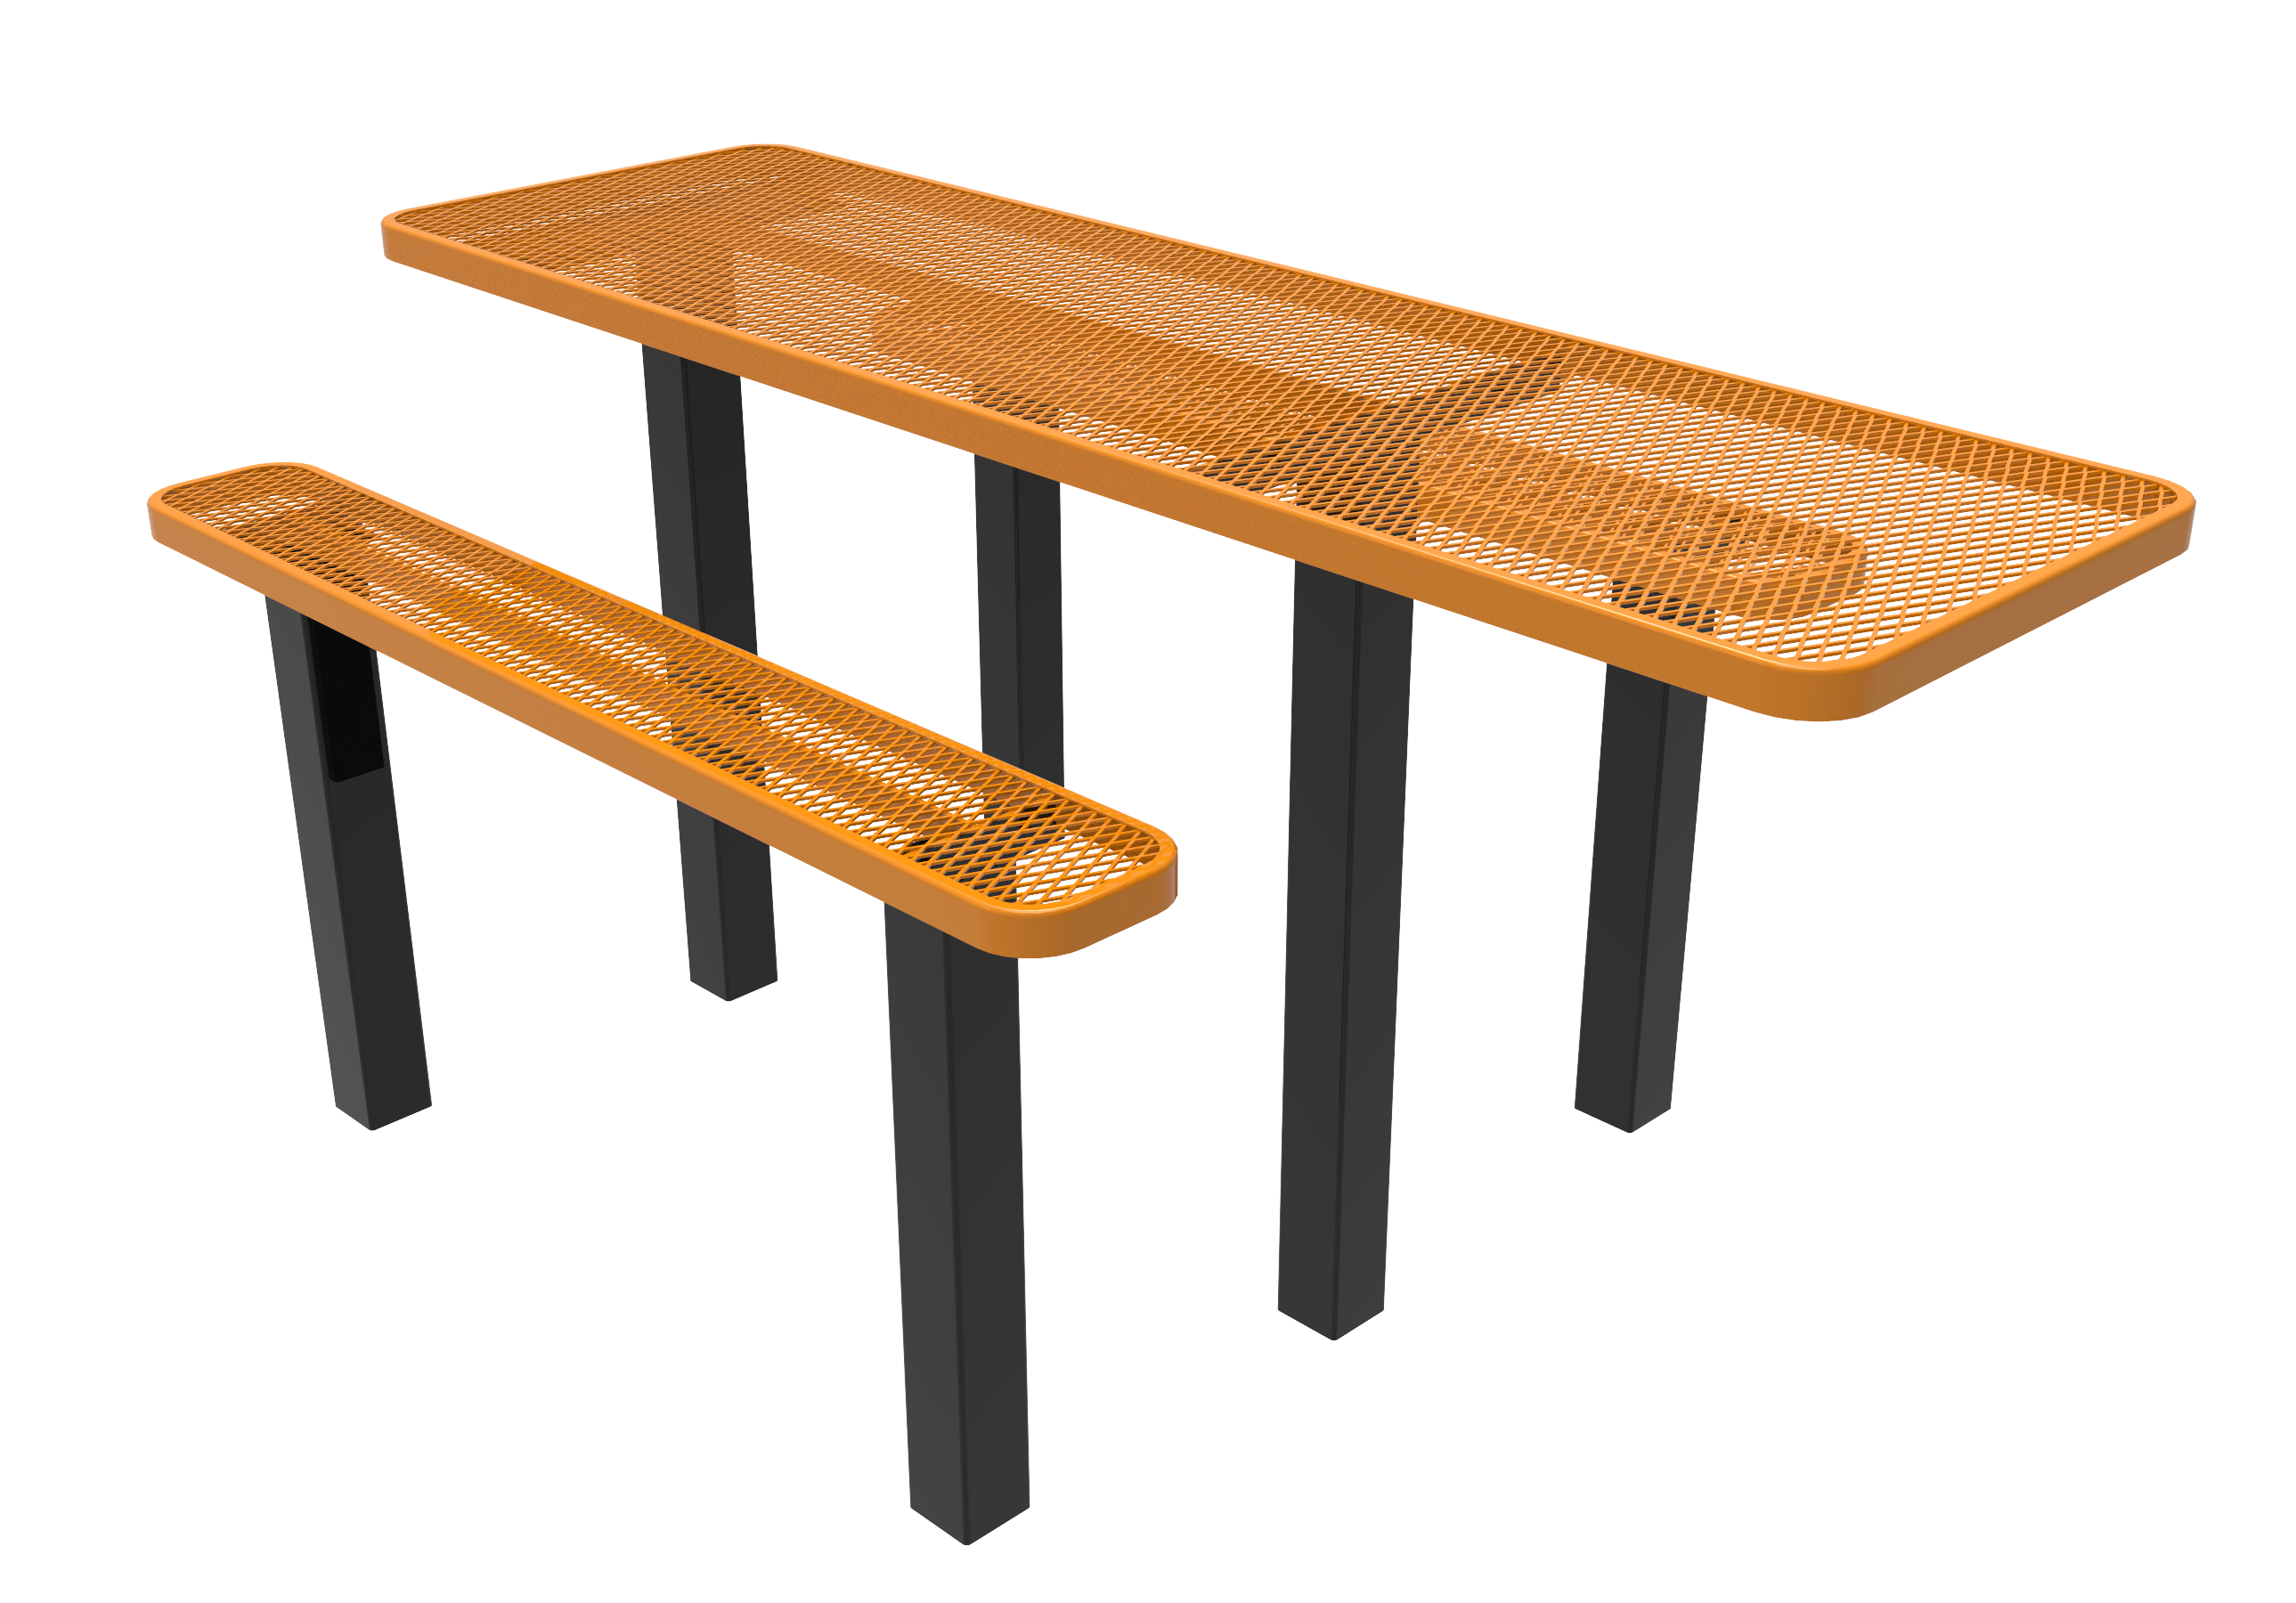 8′ Independent In Ground Table Accessible -Mesh
TRT08-C-10-001
Industry Standard Finish
$1269.00
TRT08-A-10-001
Advantage Premium Finish
$1599.00
